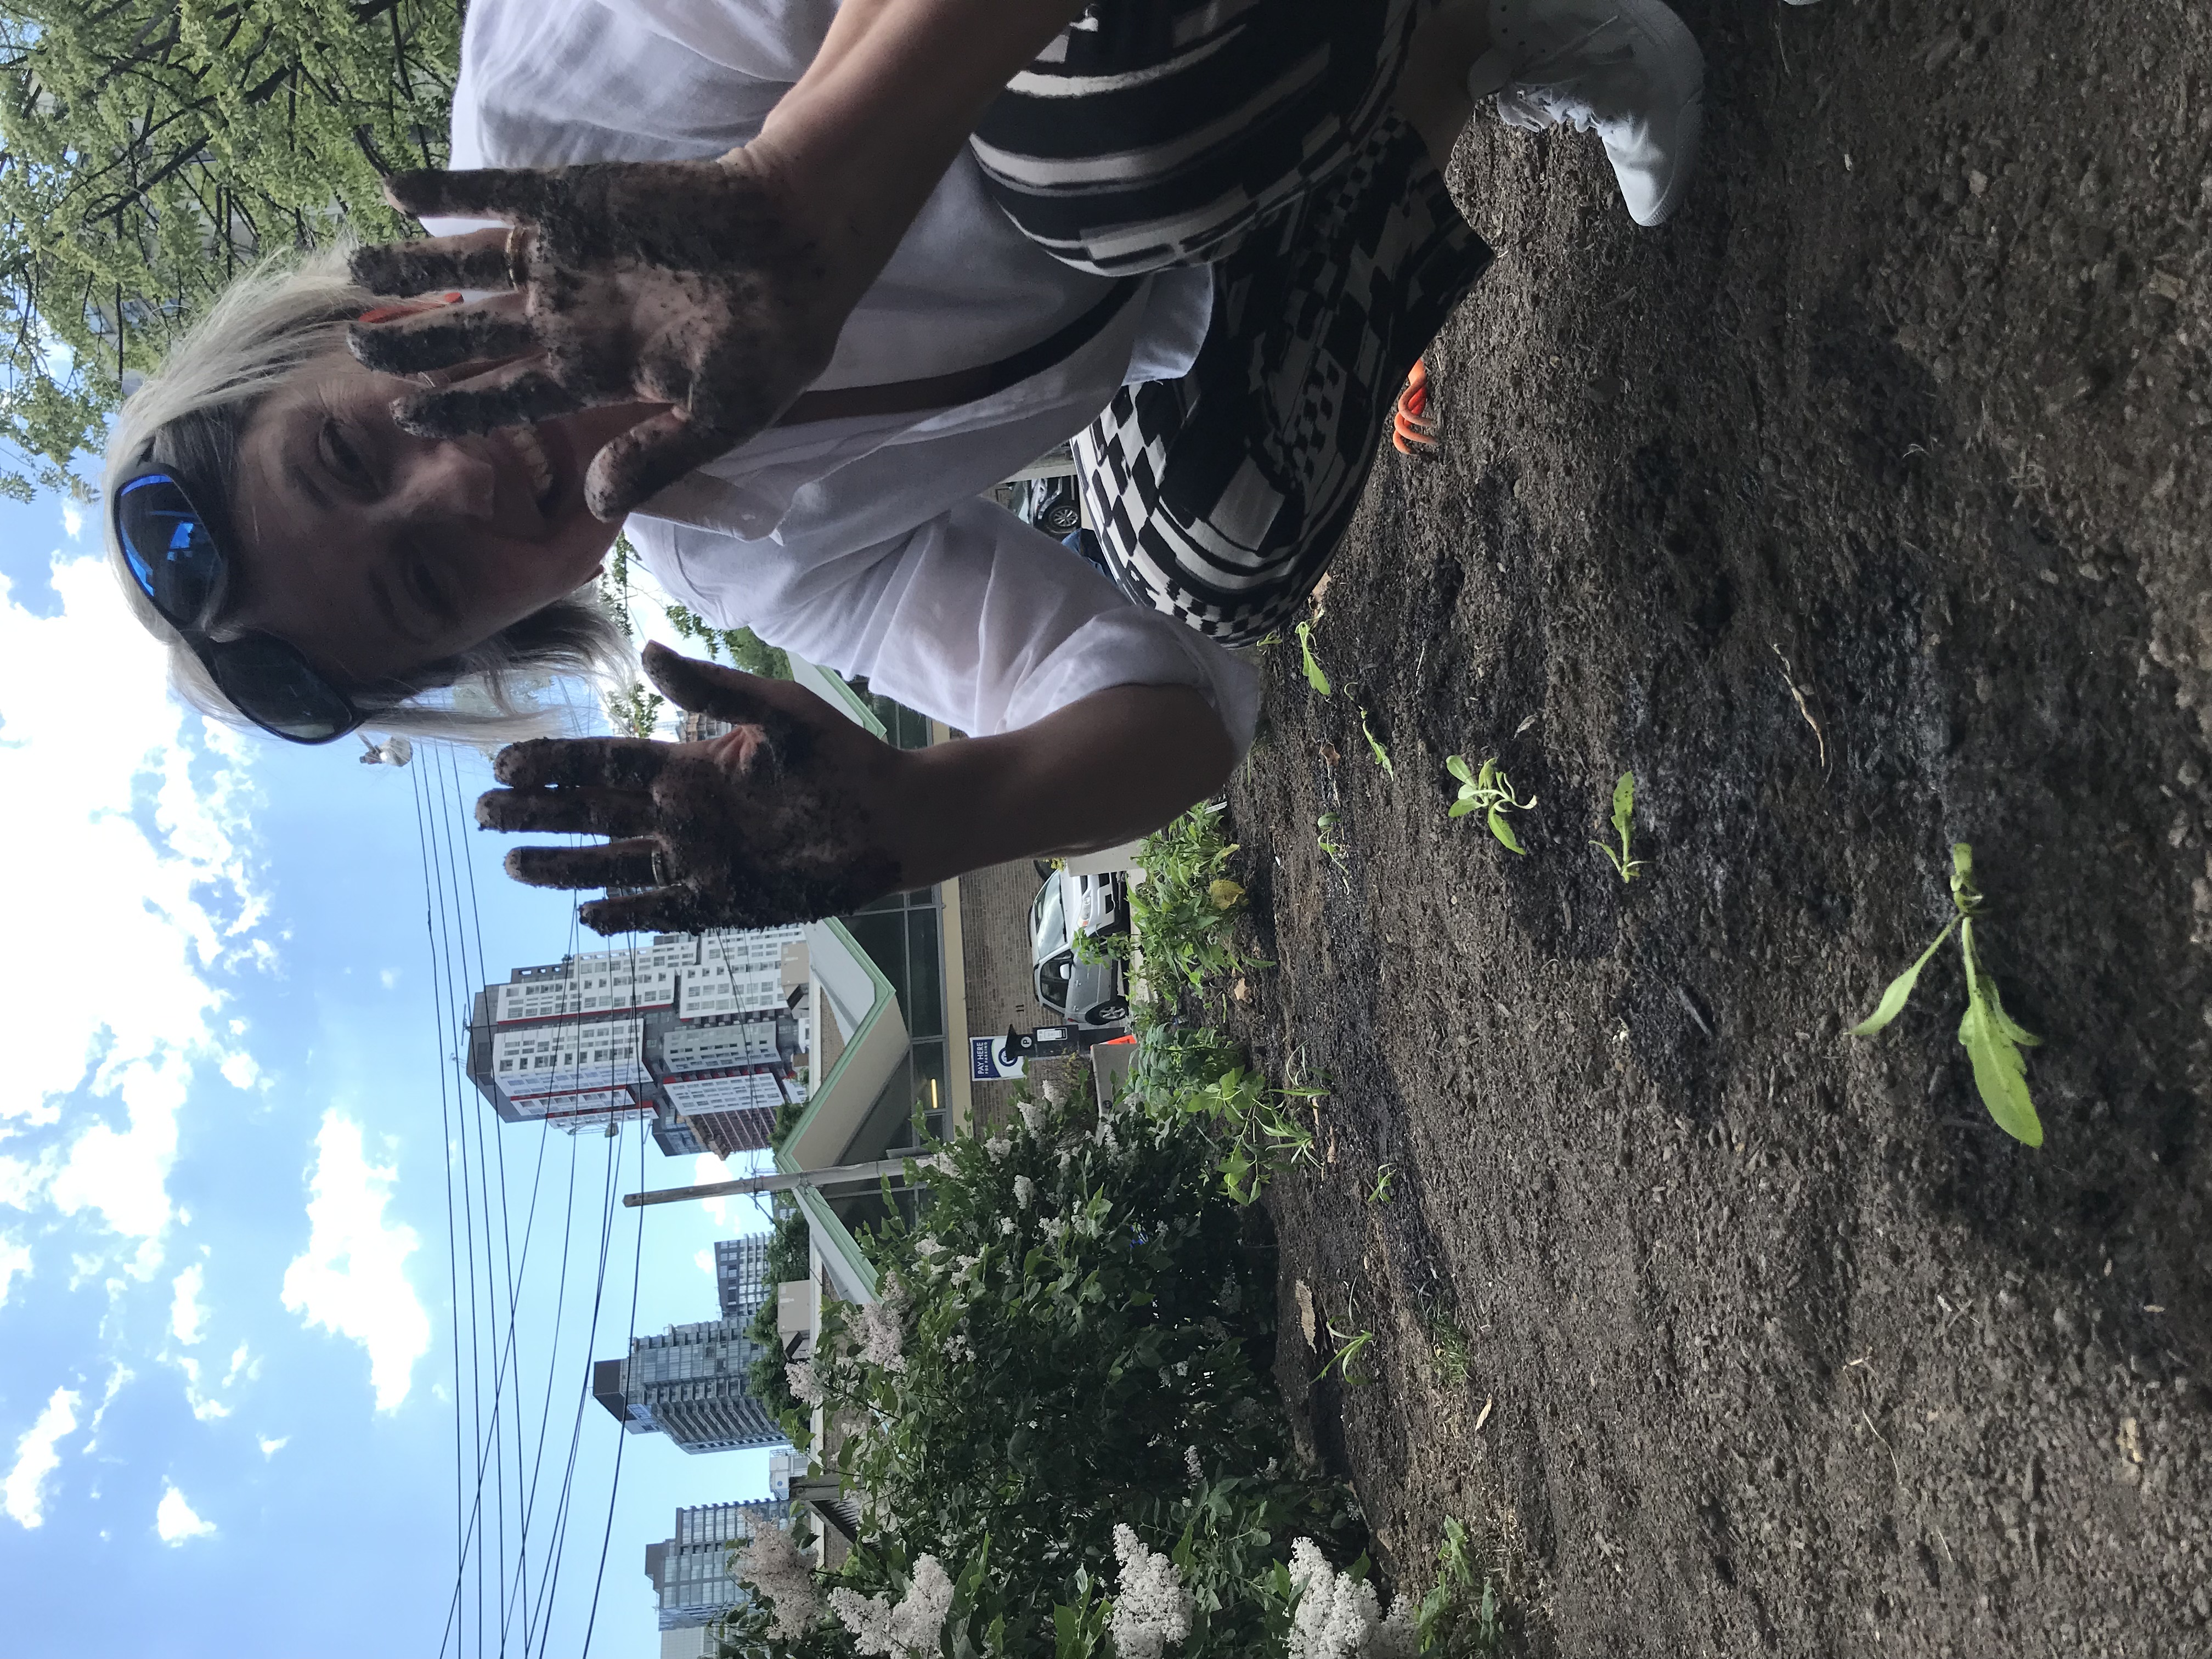 Ana P gets her hands dirty planting calendula